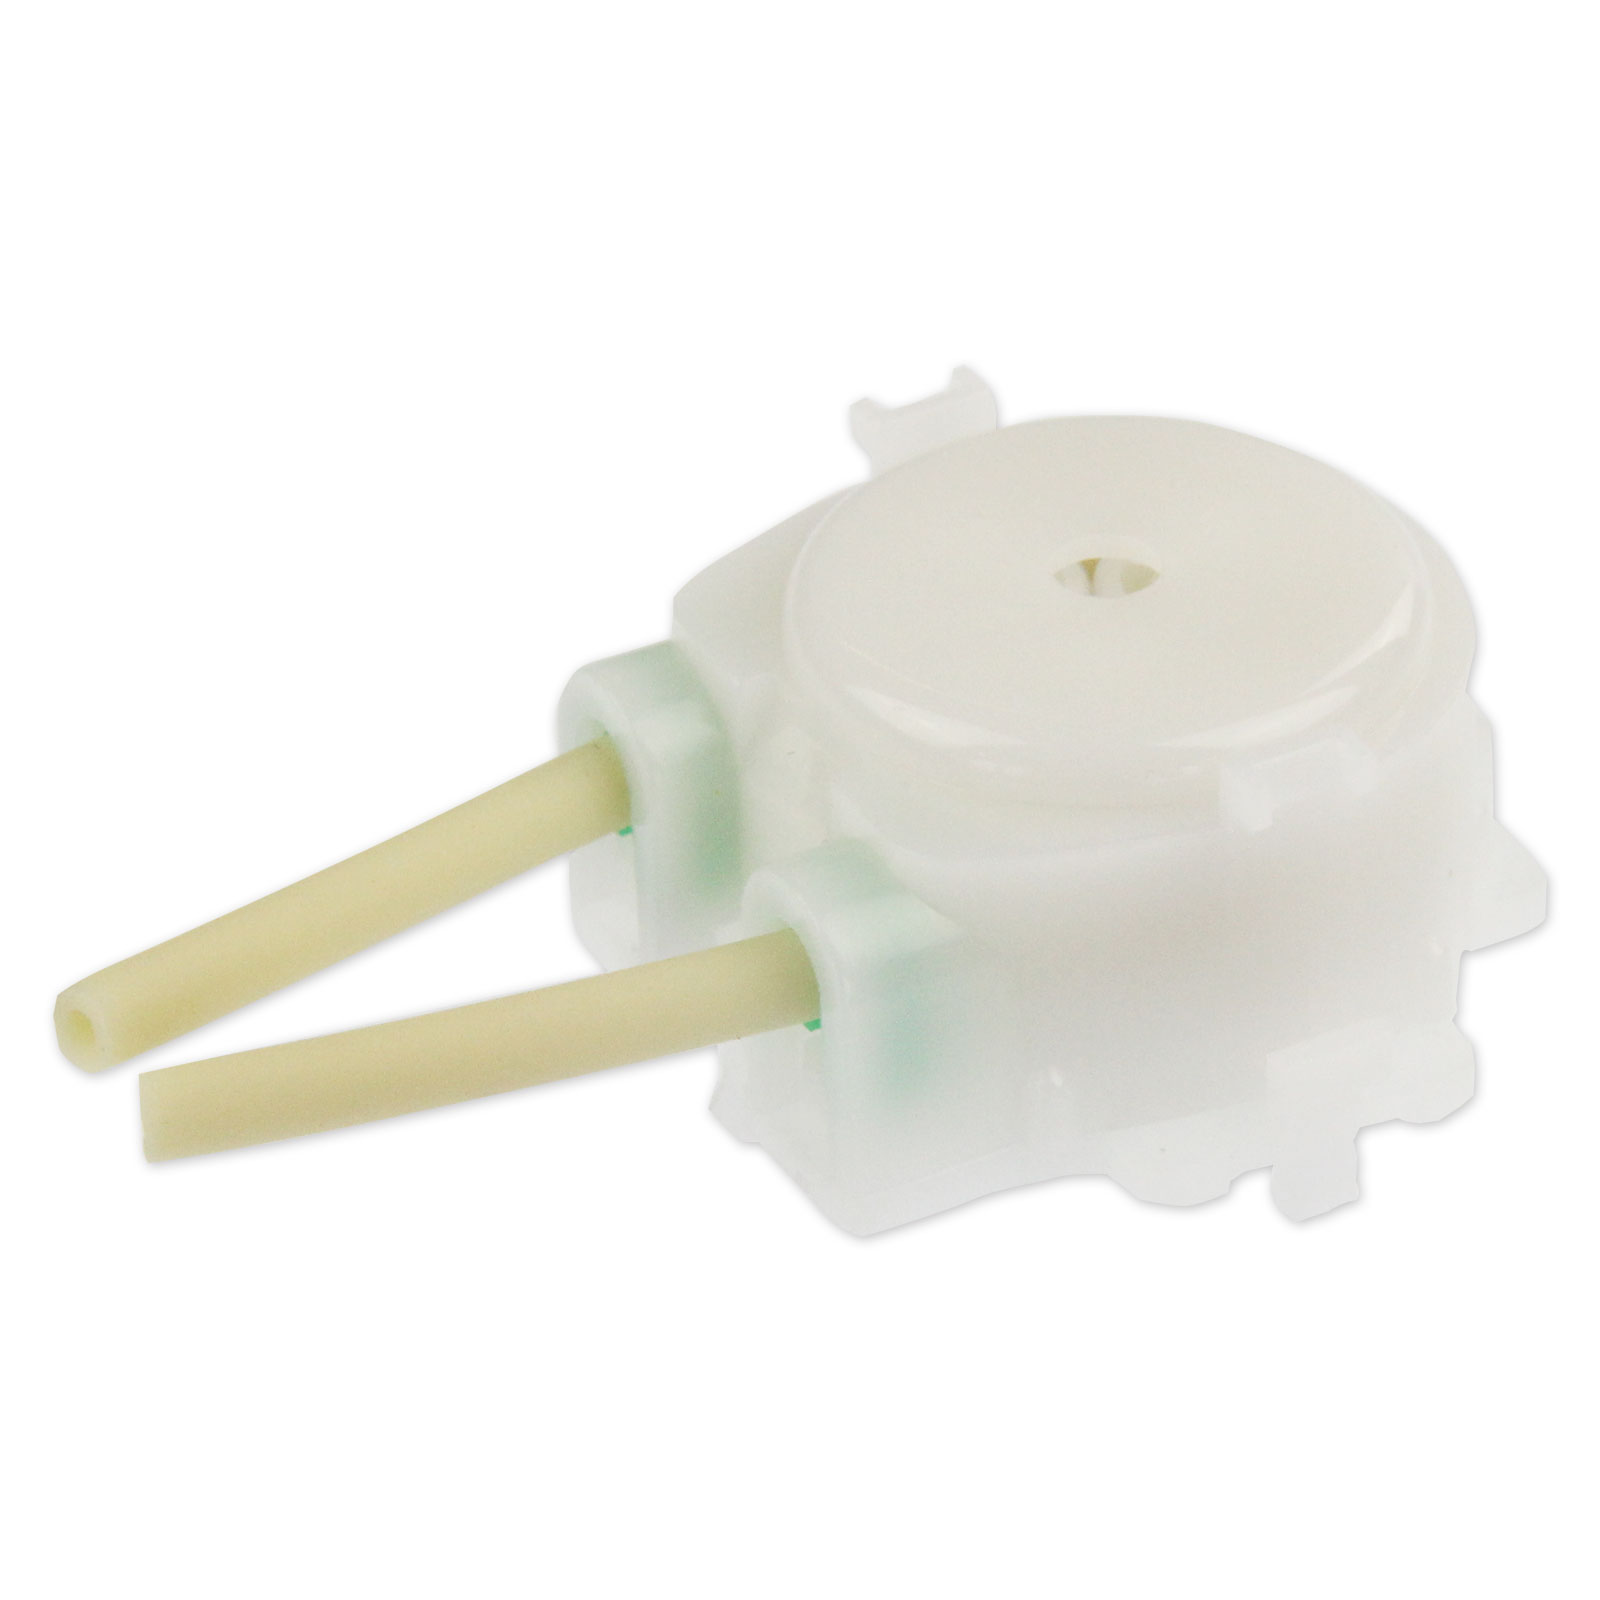 Kamoer Replacement Dosing Heads - White